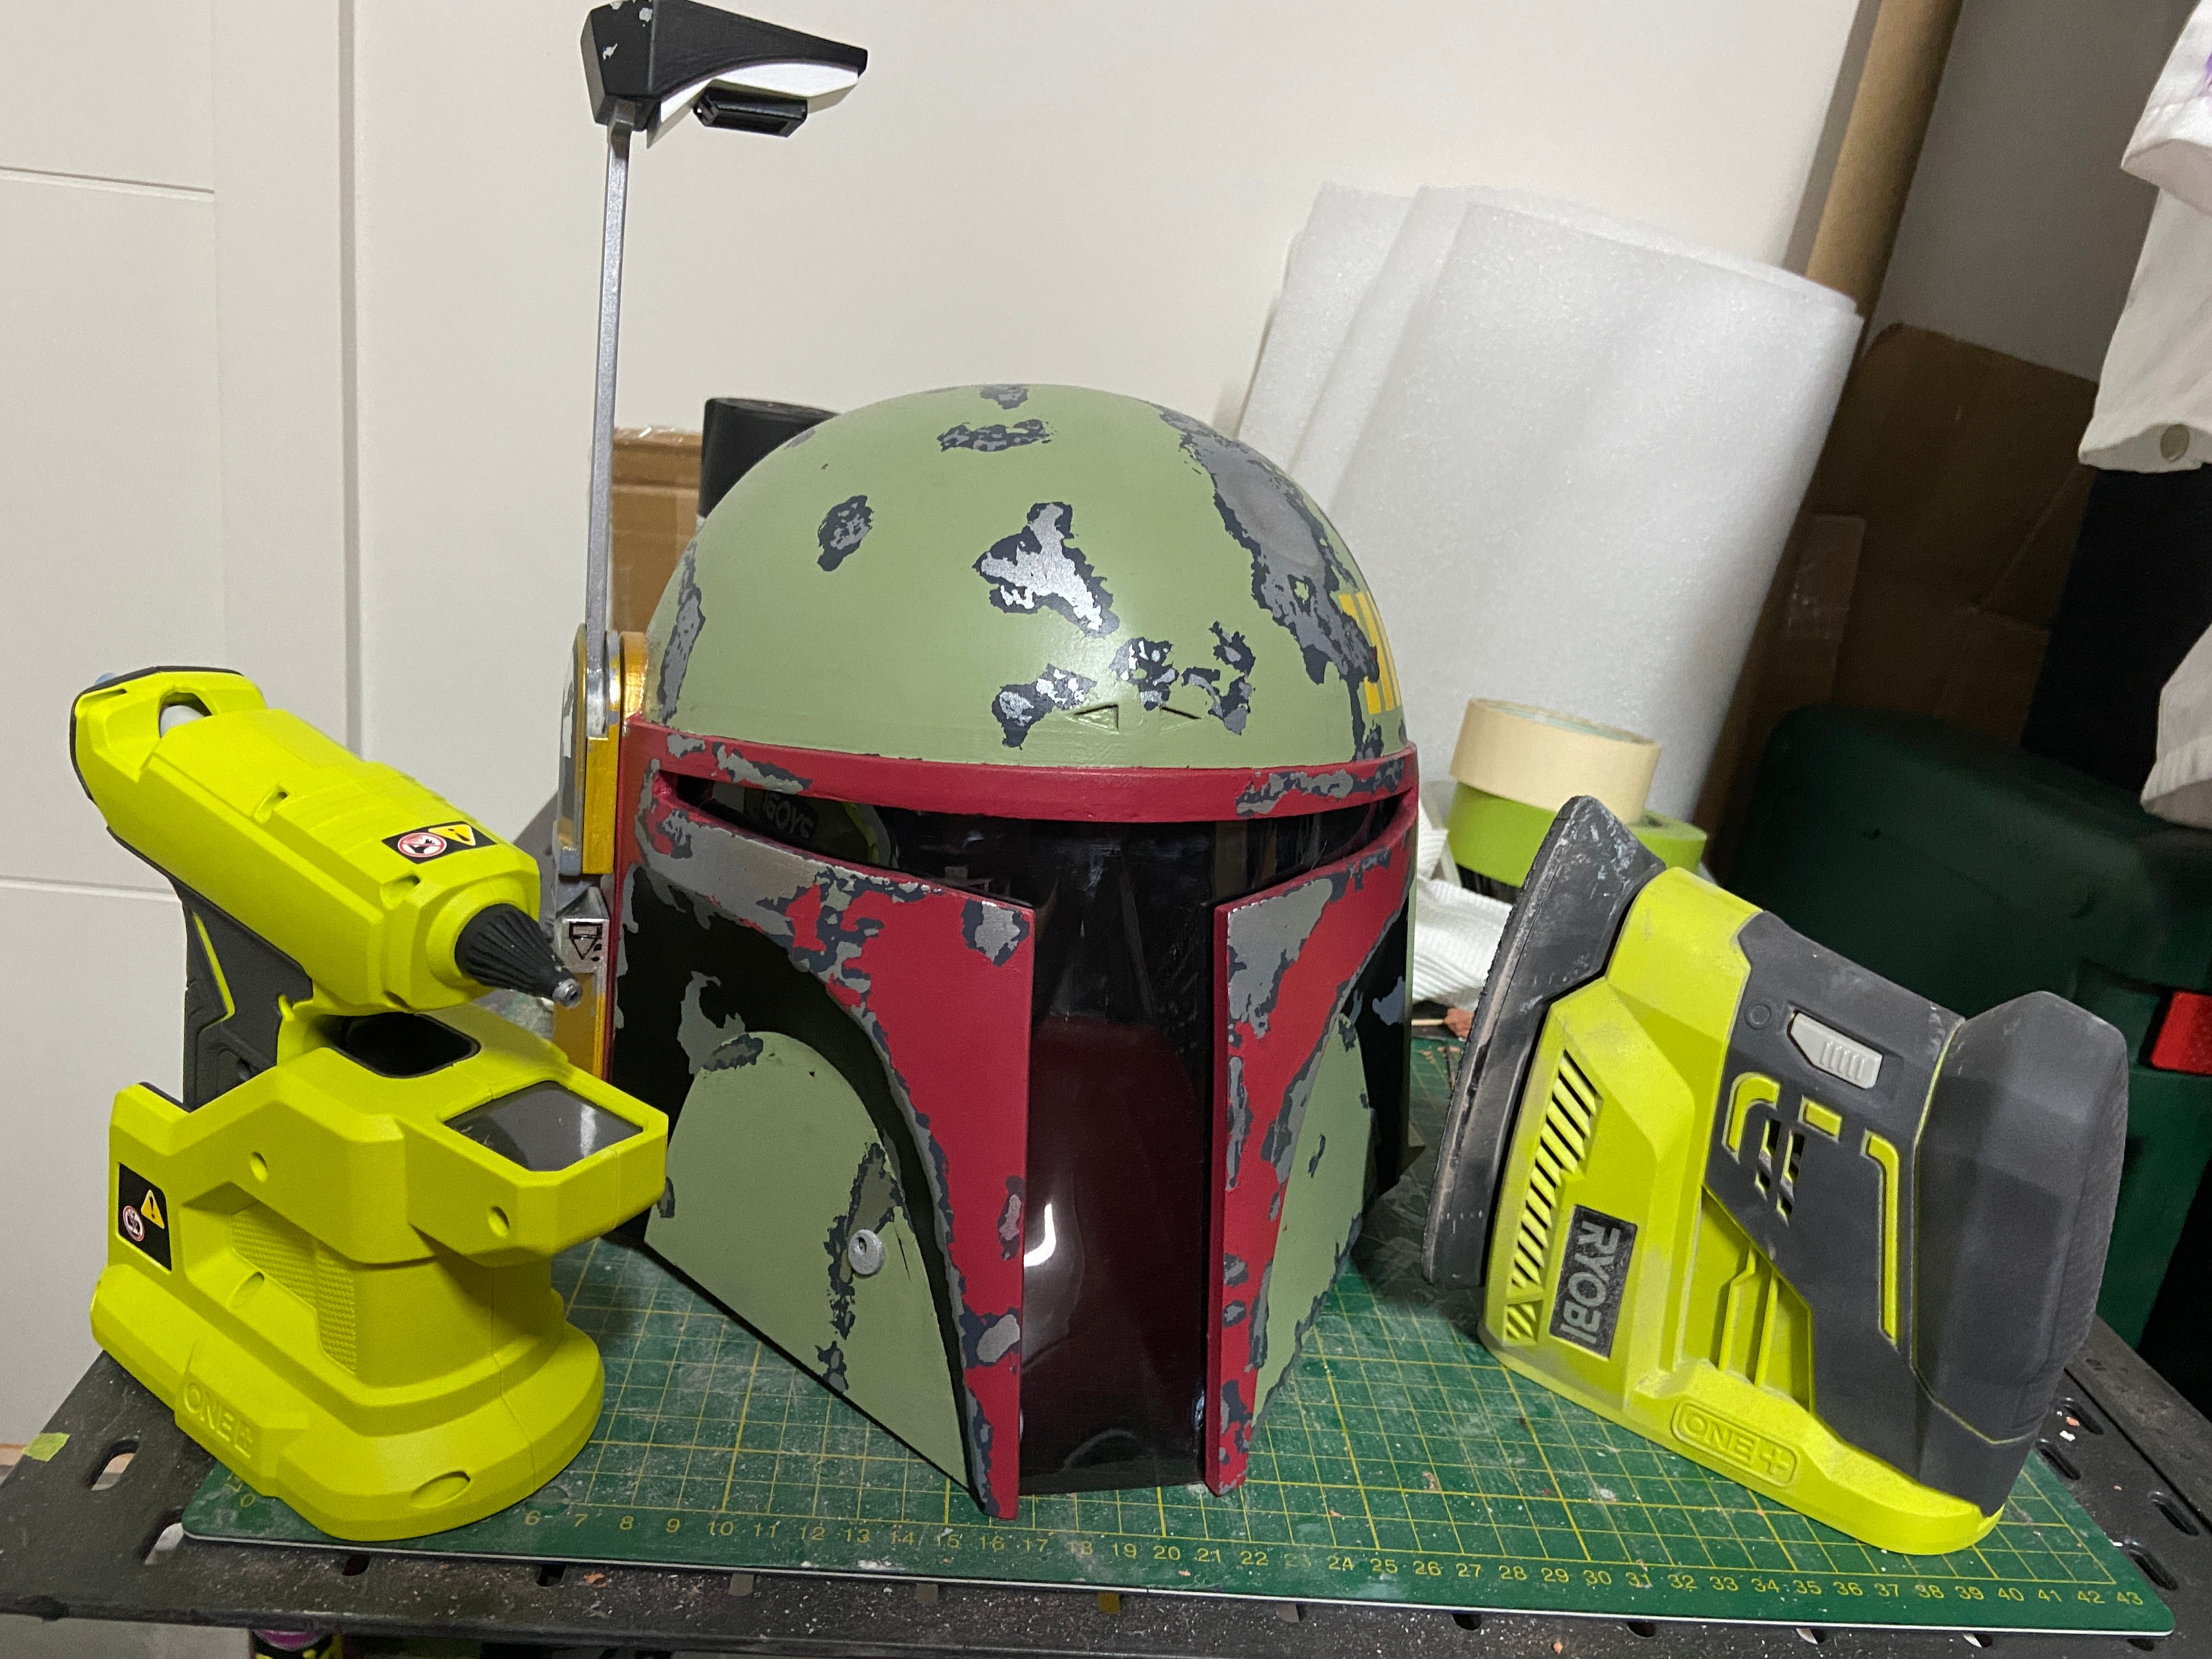 3D printed Boba Fett helmet. The ryobi corner sander was excellent as it allowed me to sand the tight areas within the visor and the overall helmet. The Ryobi hot glue, due to its size was excellent for gluing the visor within the helmet.